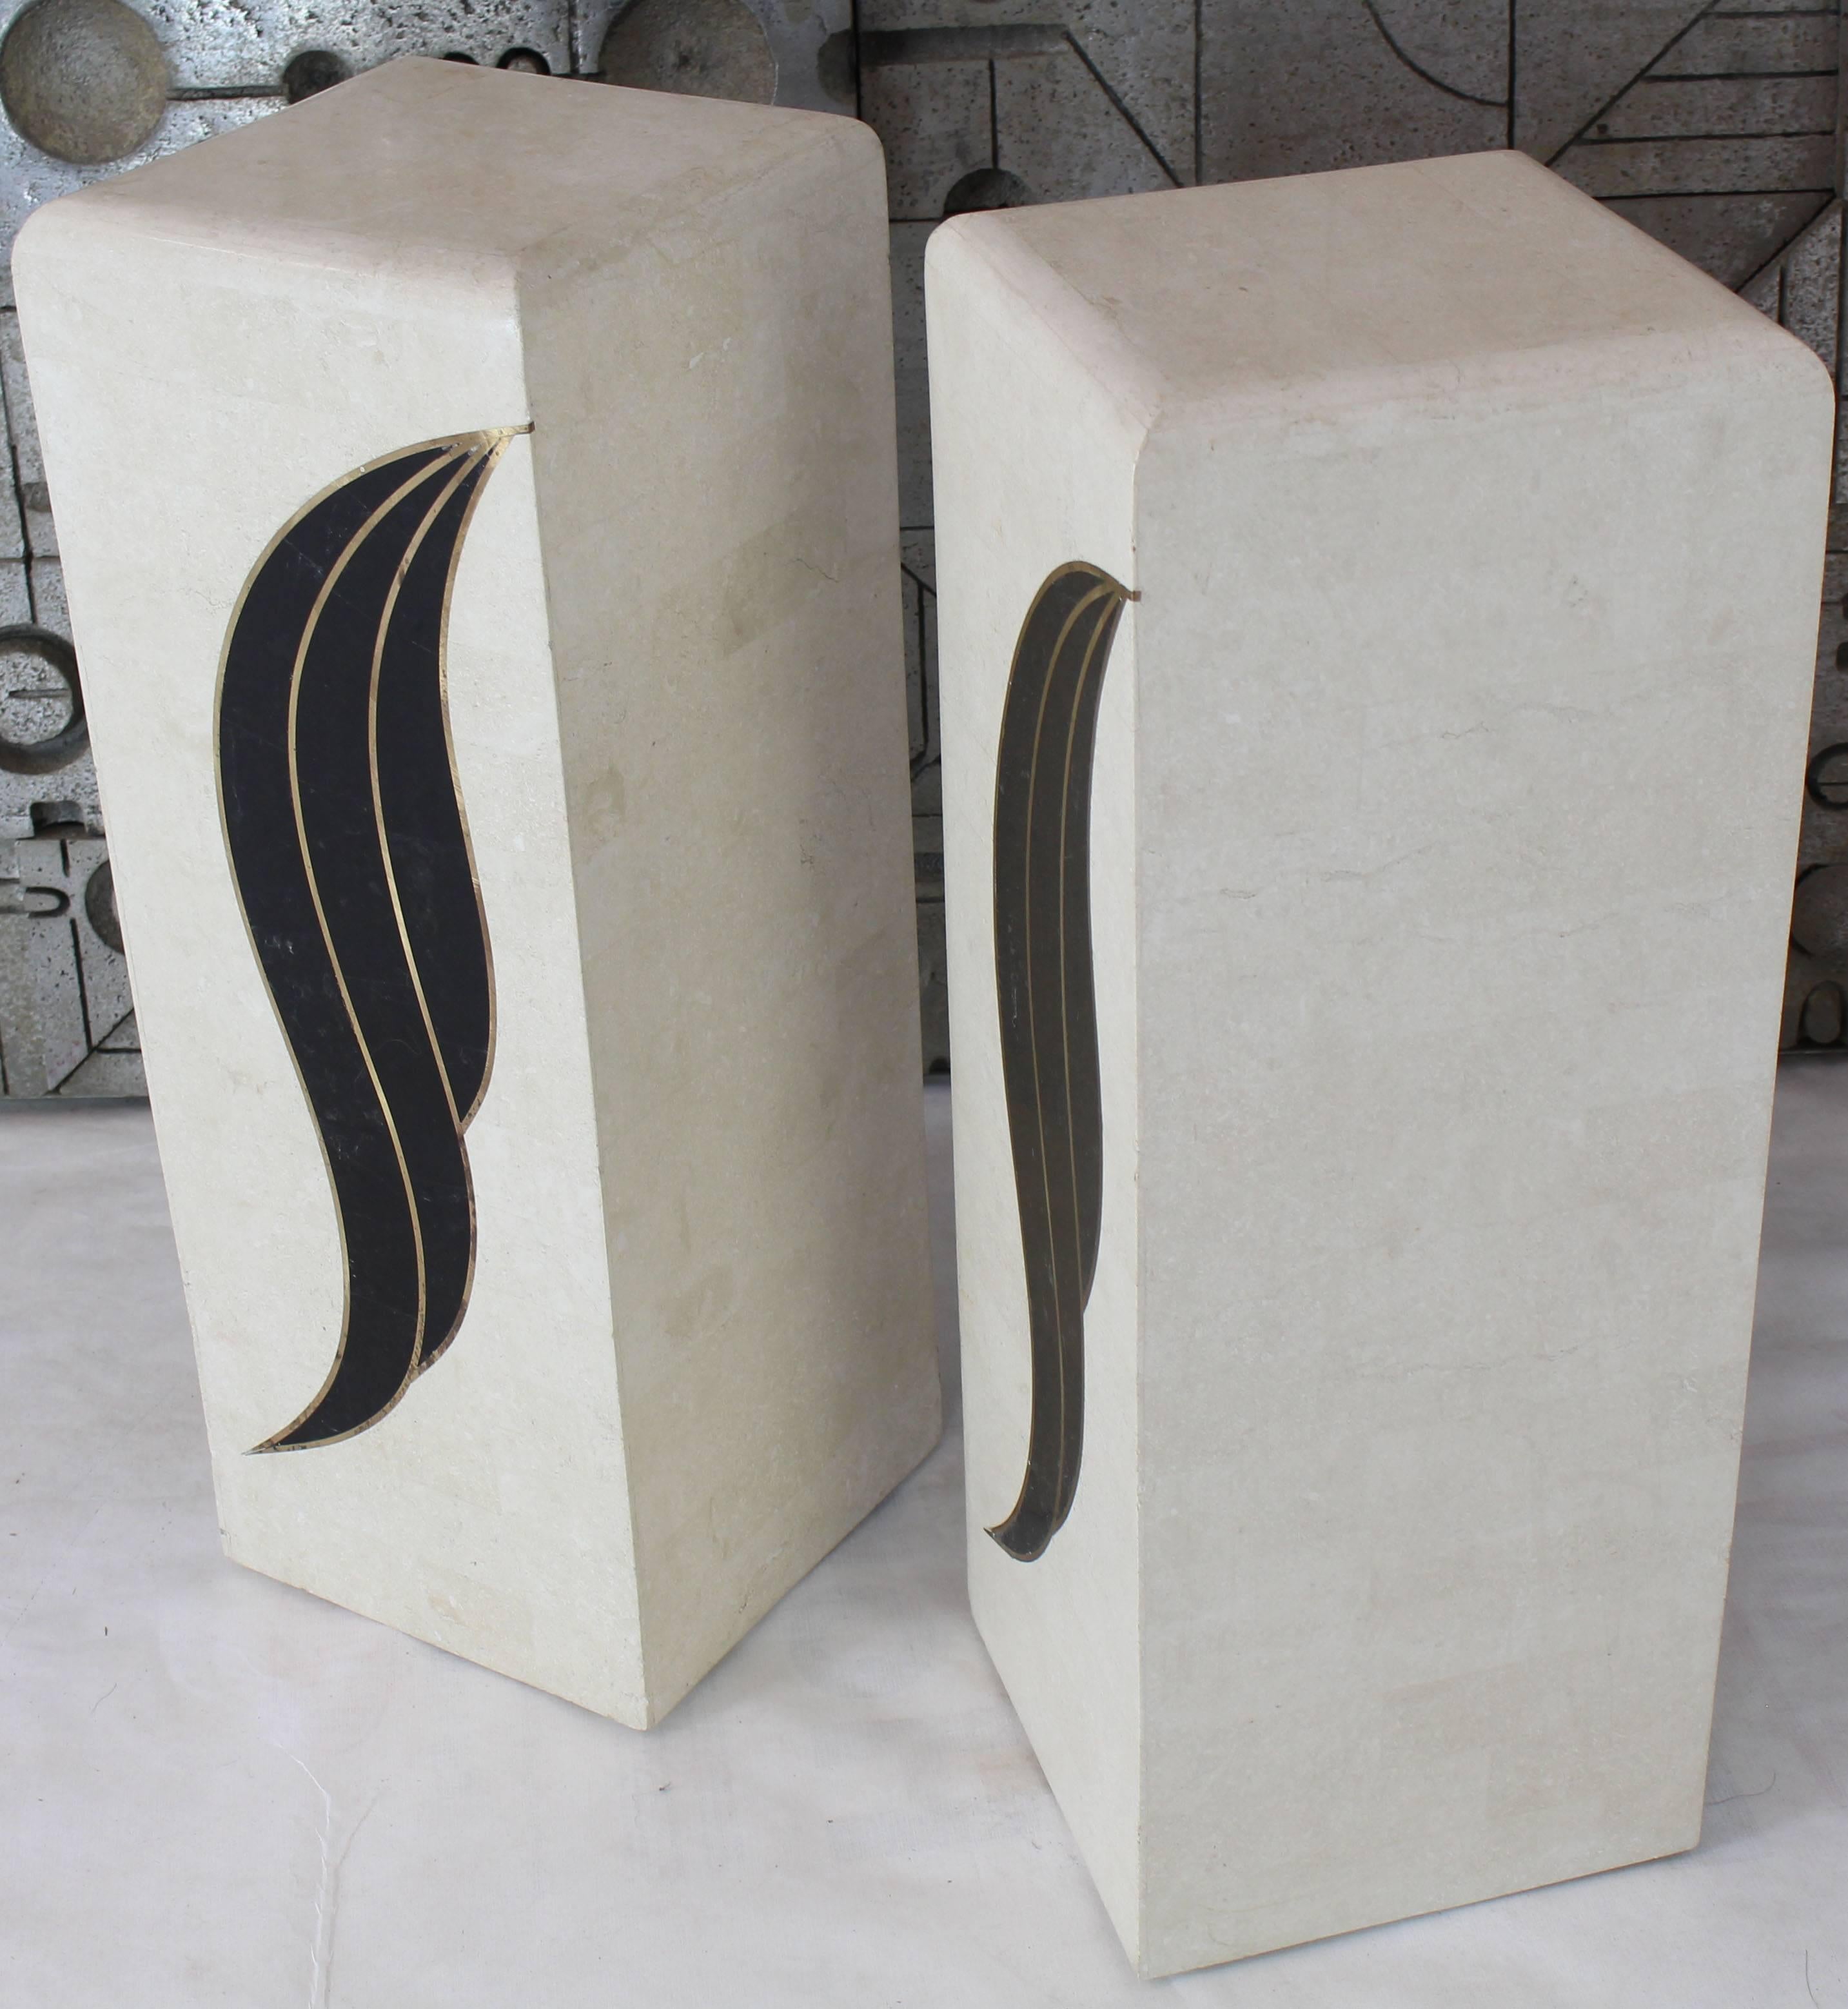 Pair of Tessellated Black and Beige Stone or Tile Brass Inlay Pedestals 1